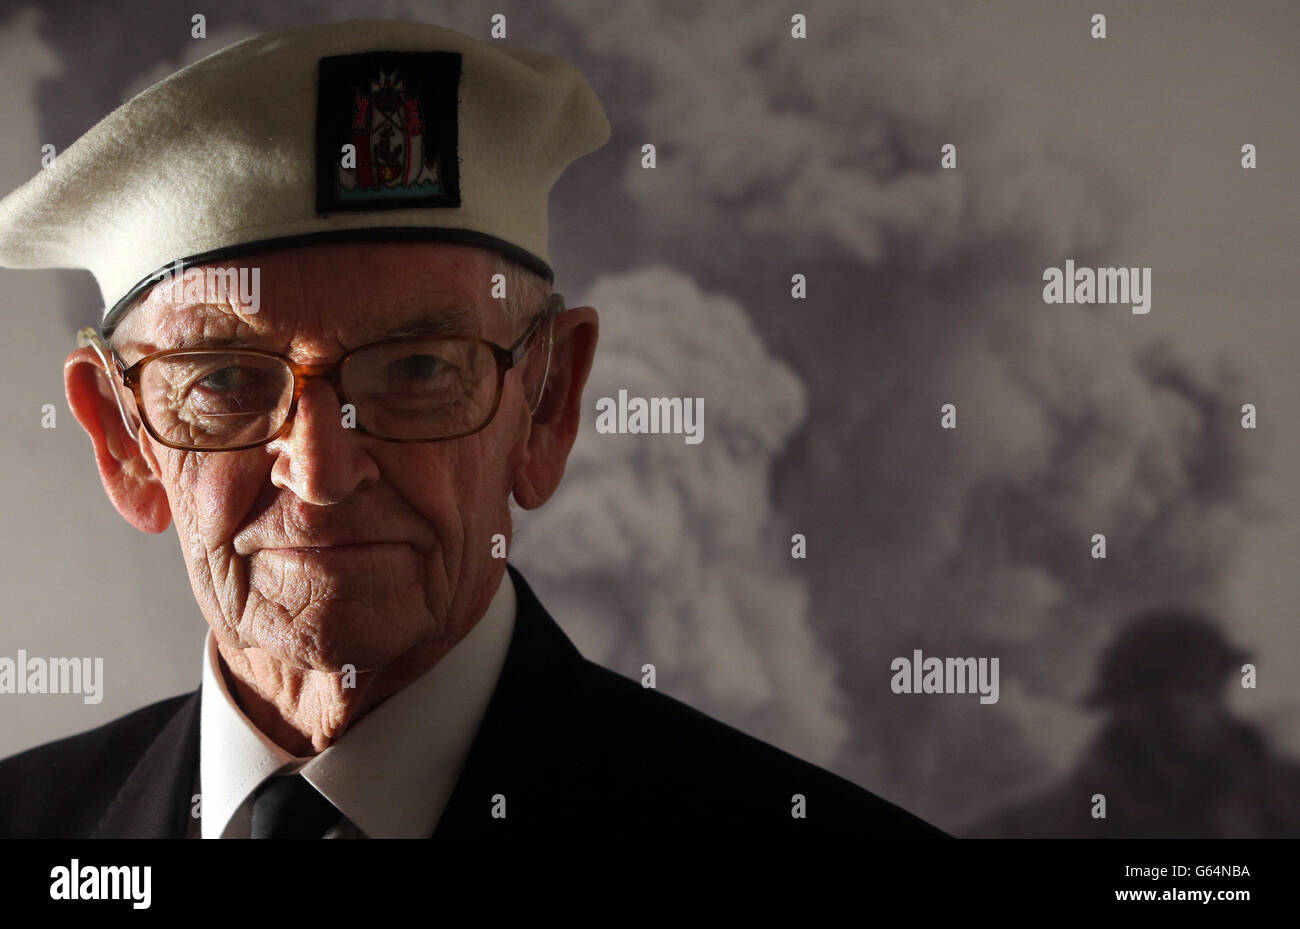 David Craig, a former merchant navy seaman, at the Arctic Convoys exhibition which opens on May 29 at the National War Museum Edinburgh Castle. The convoys sailed from Britain from in 1941 to 1945 delivering supplies to the Soviet Union. Stock Photo